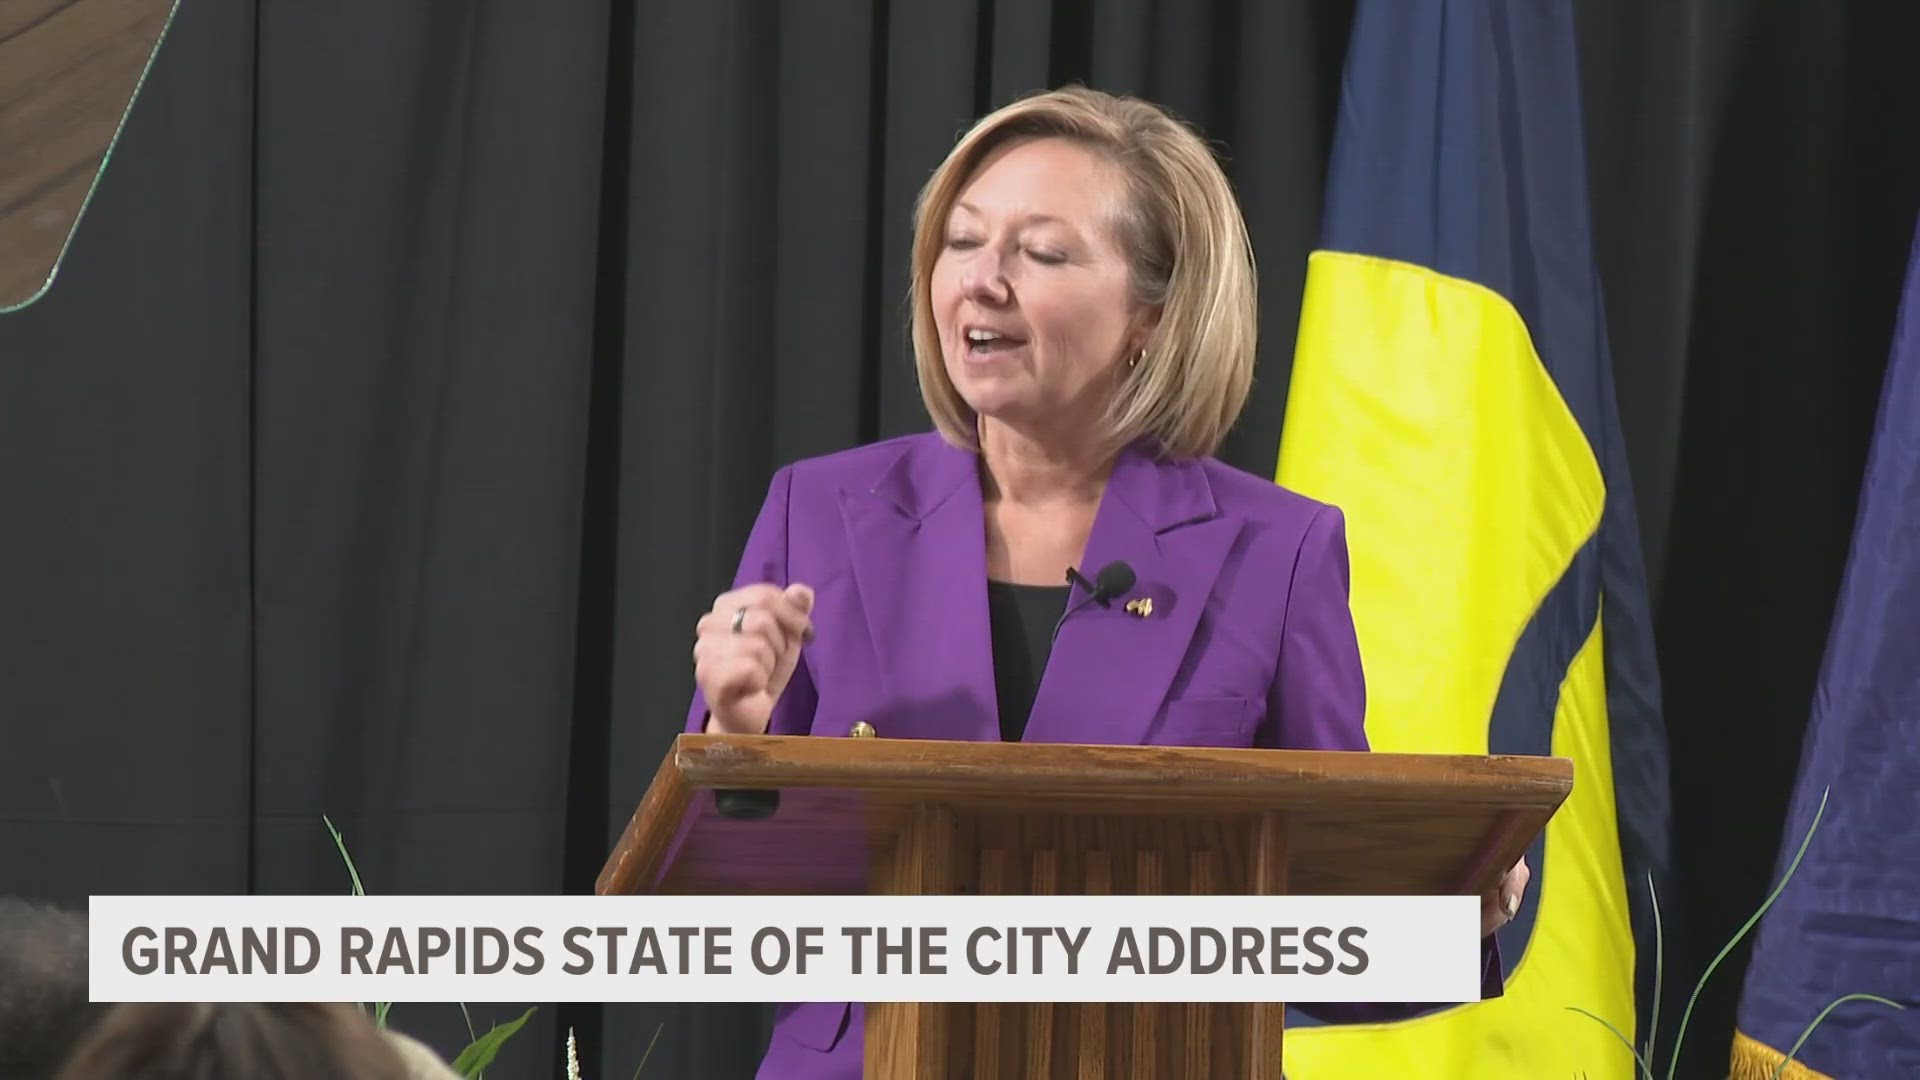 Mayor Bliss also addressed the housing crisis in Grand Rapids, as well as the delayed Grand River whitewater project.